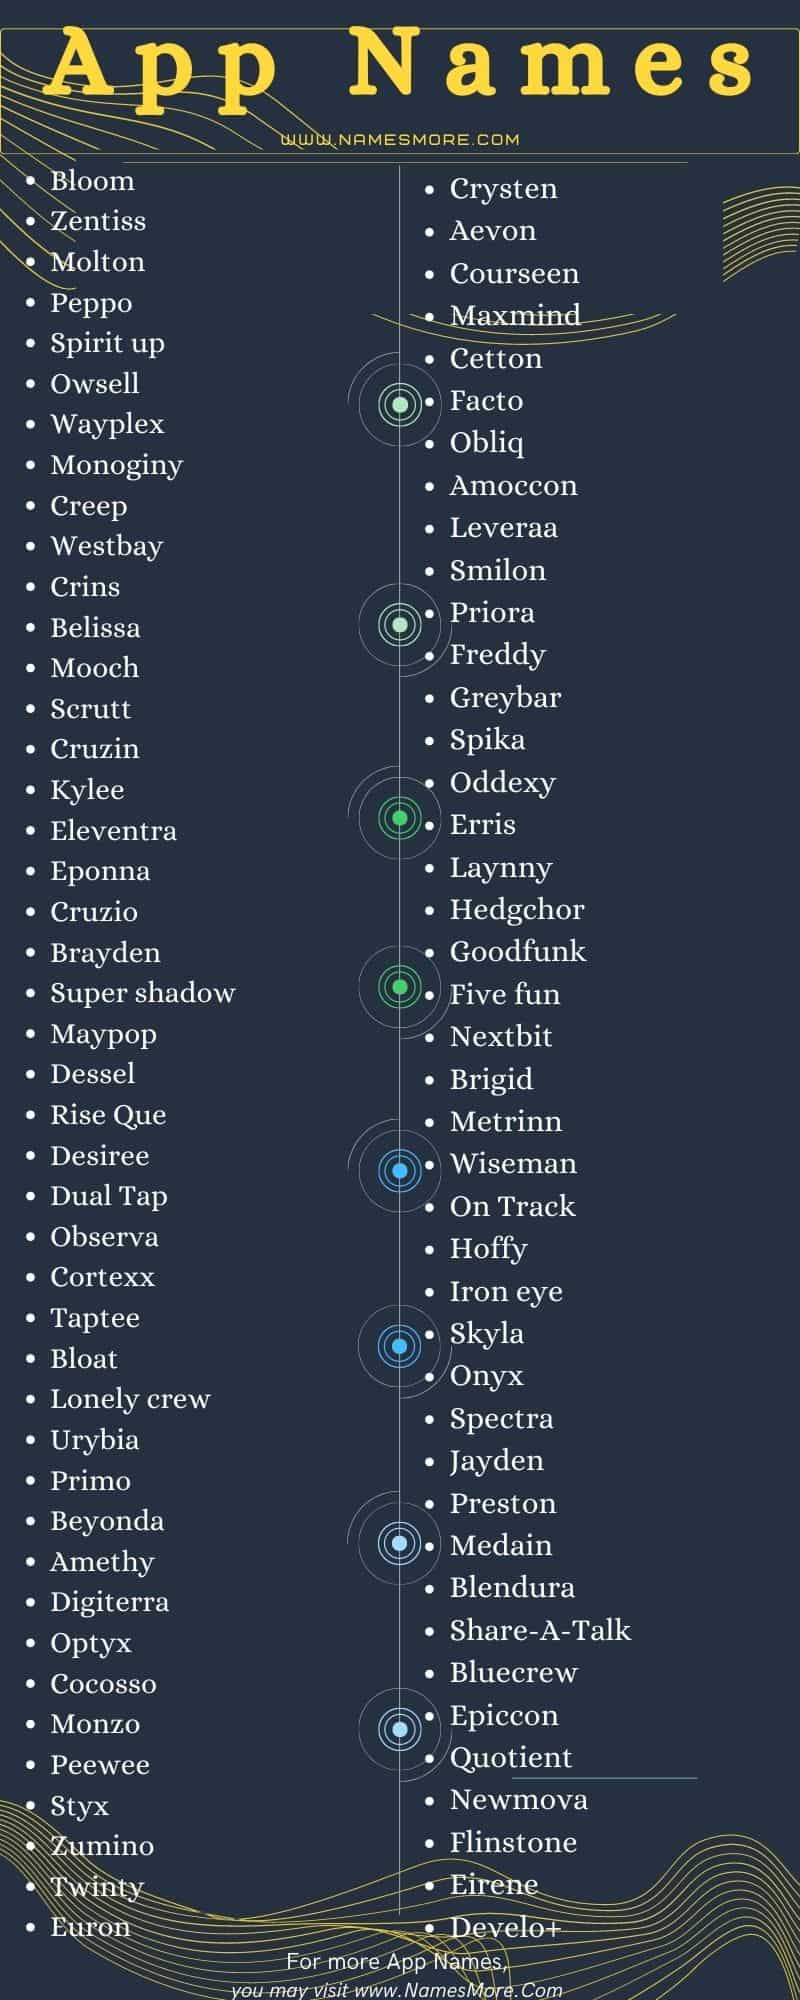 1900+ App Names : Cathy & Unique Names for Applications List Infographic